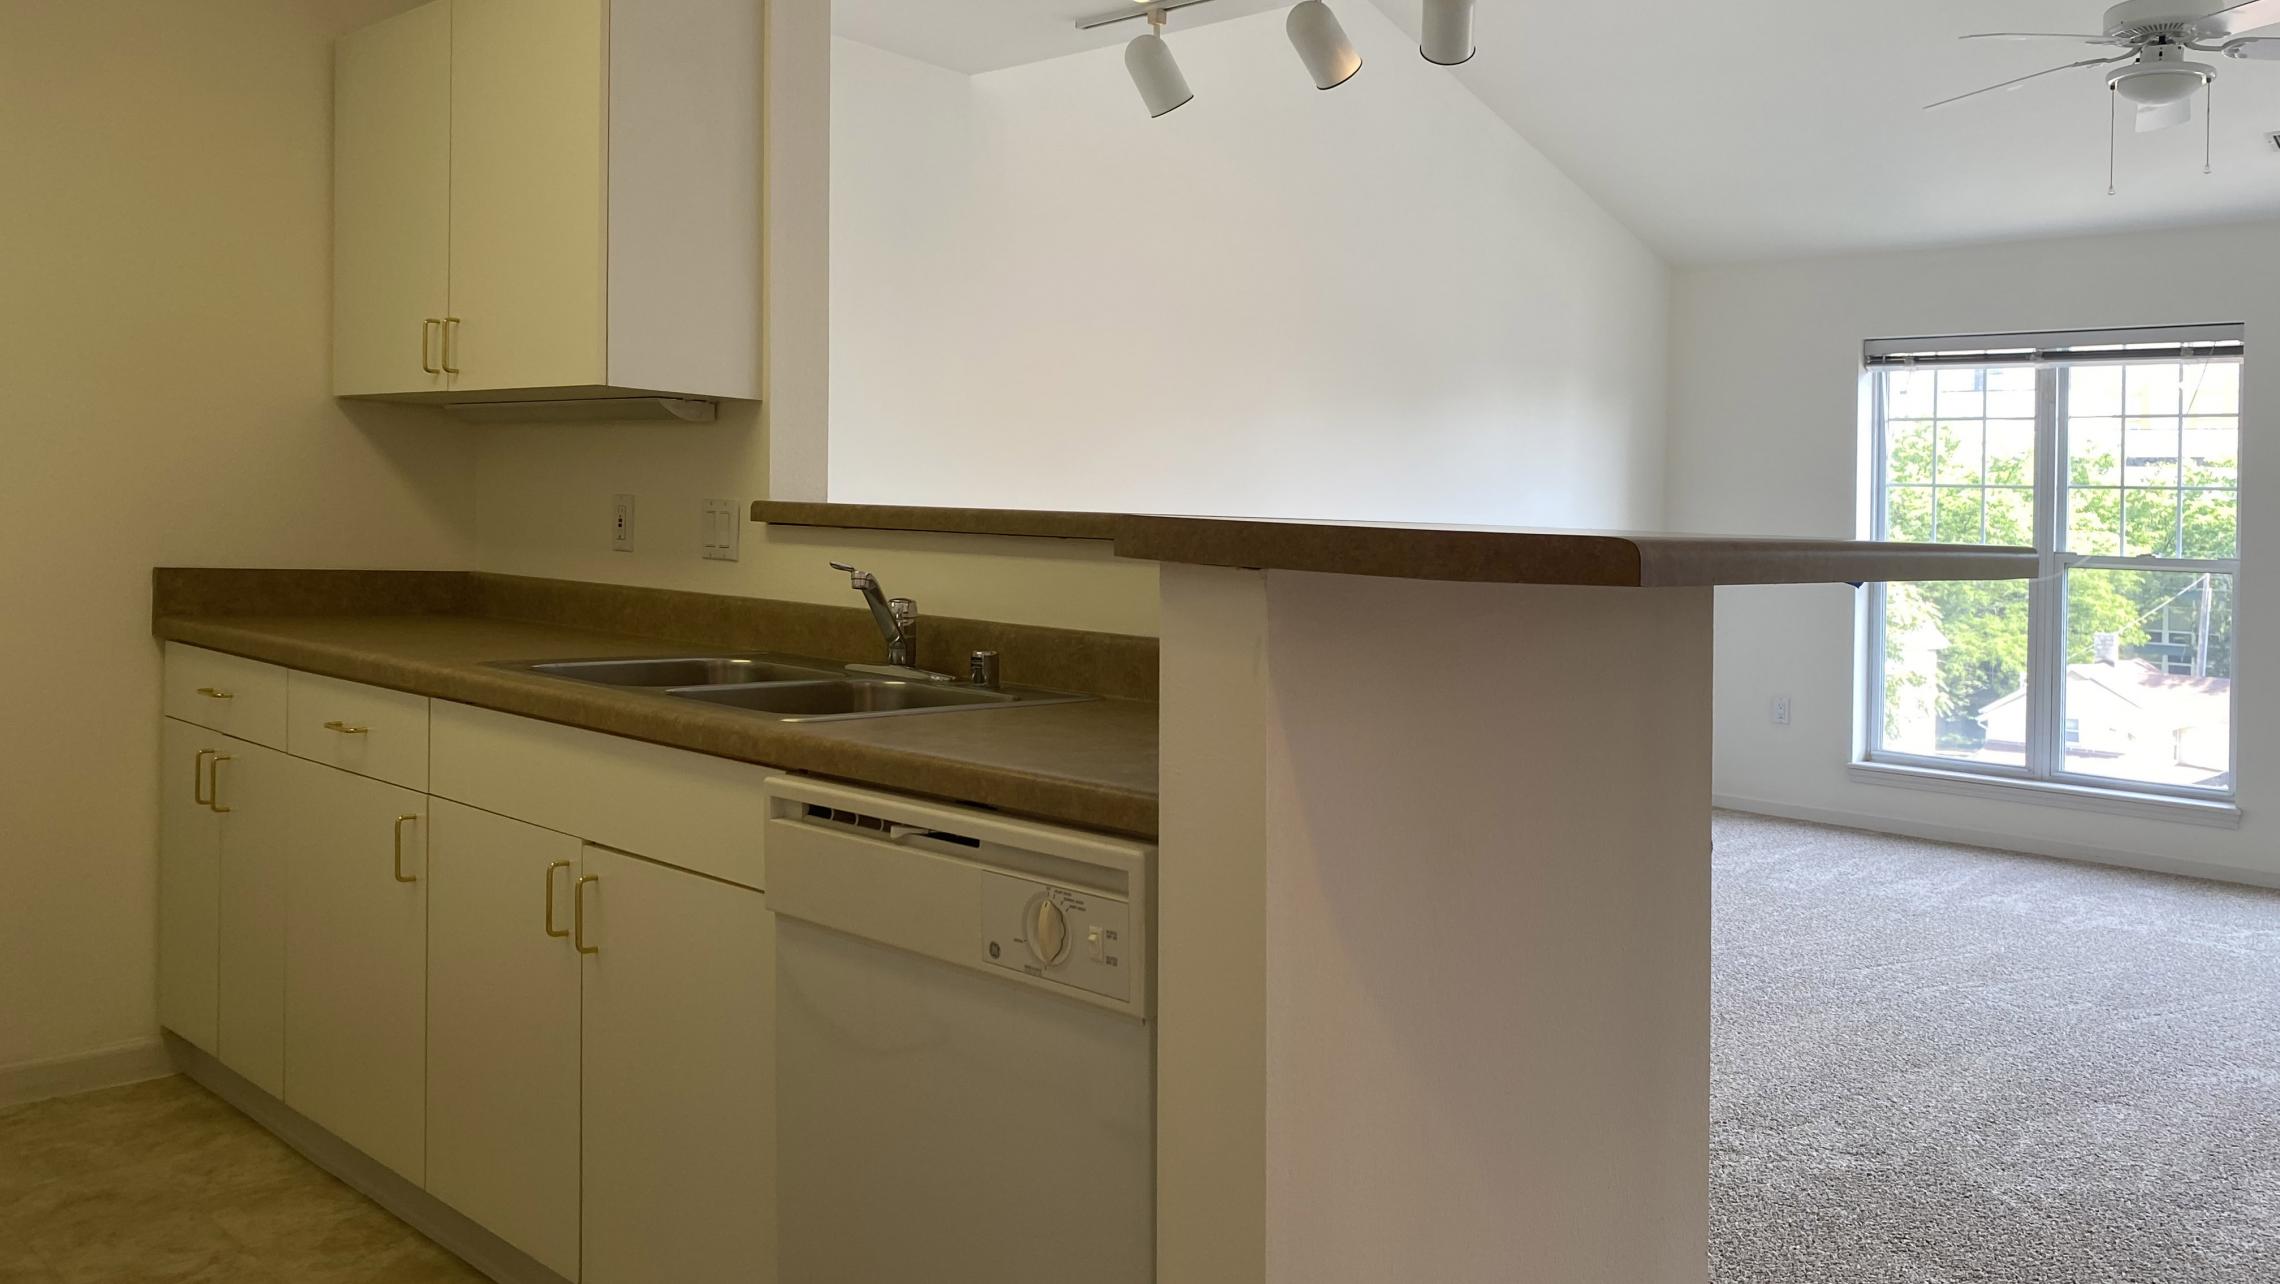 City-Place-Apartment-408-One-Bedroom-Natural-Light-Sunny-Bright-Bathroom-Kitchen-Living-Balcony-Downtown-Madison-Bike-City-Capitol-Lifestyle-Home-Laundry-Storage-Closet-Bathtub